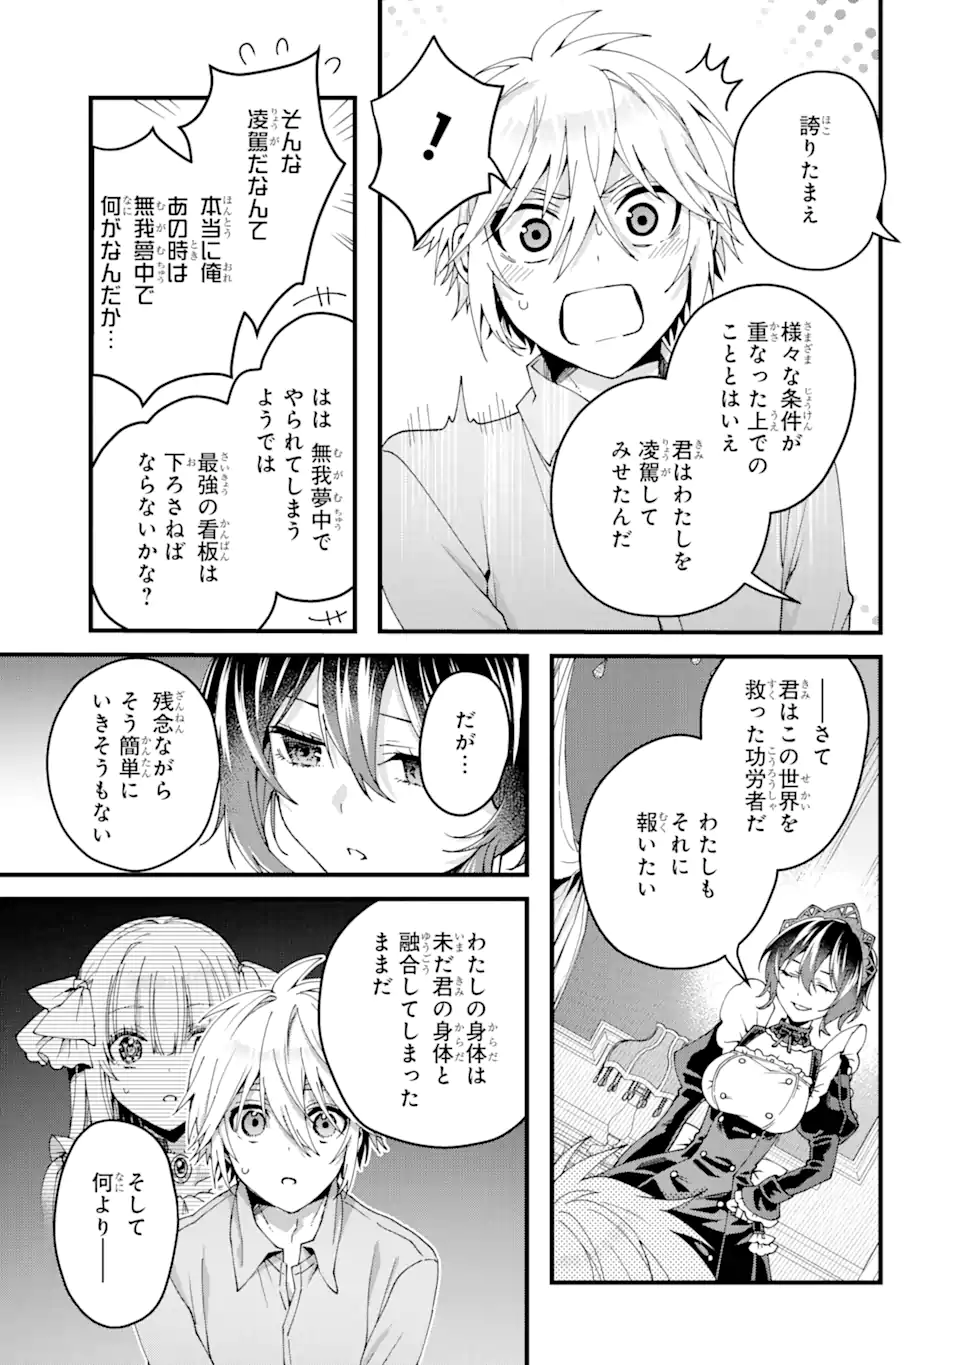 Ousama no Propose - Chapter 14.4 - Page 2